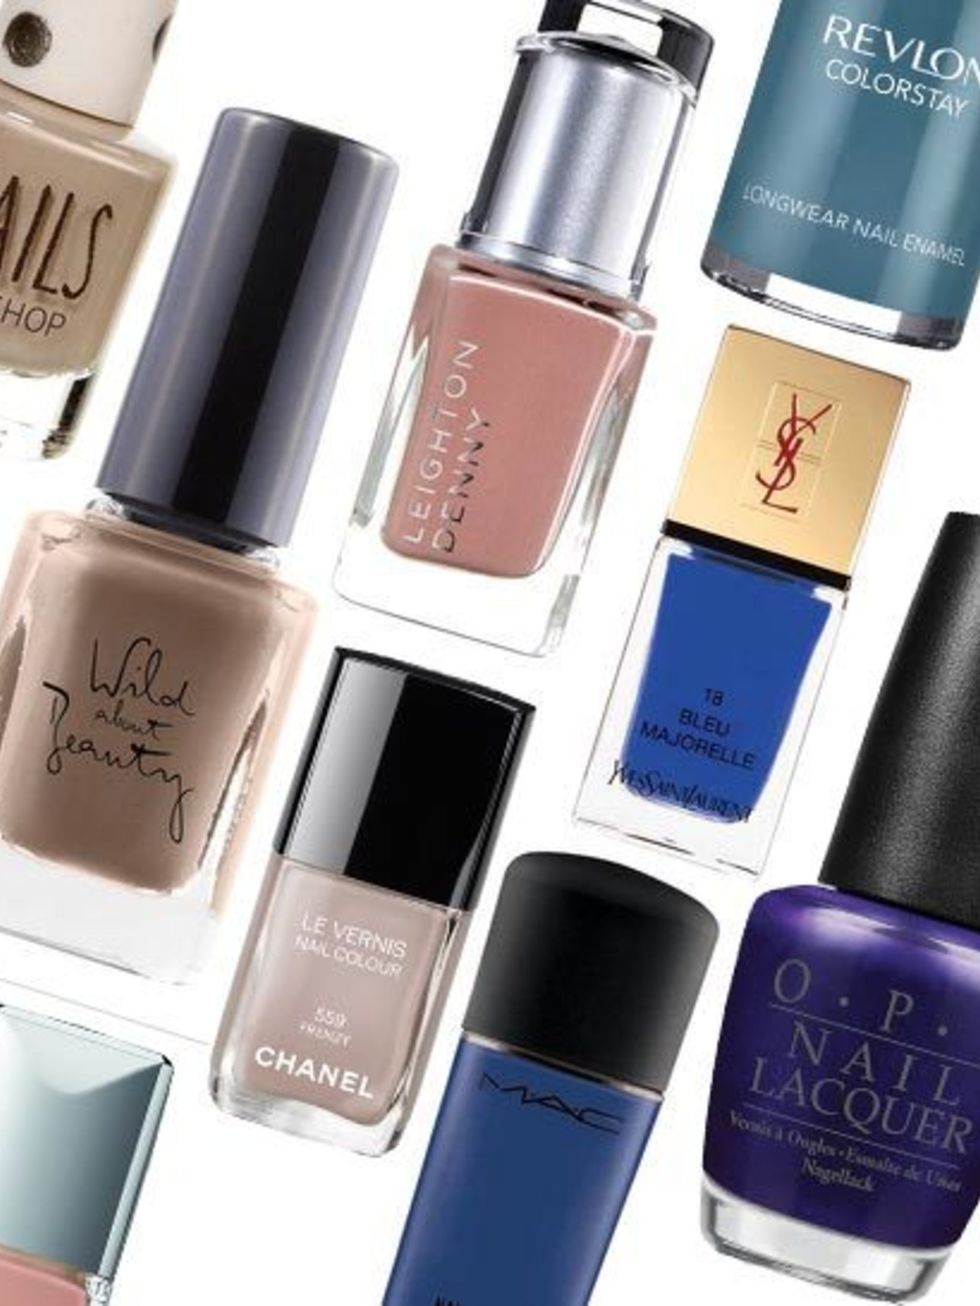 <p>This season, two stand-out nail trends gripped the catwalk  chic nudes and rich blues. Autumn/winter 12 sees a battle of the manicure shades, nude and blue go head-to-head in the fight for the It nail shade accolade. But which trend will you be flau